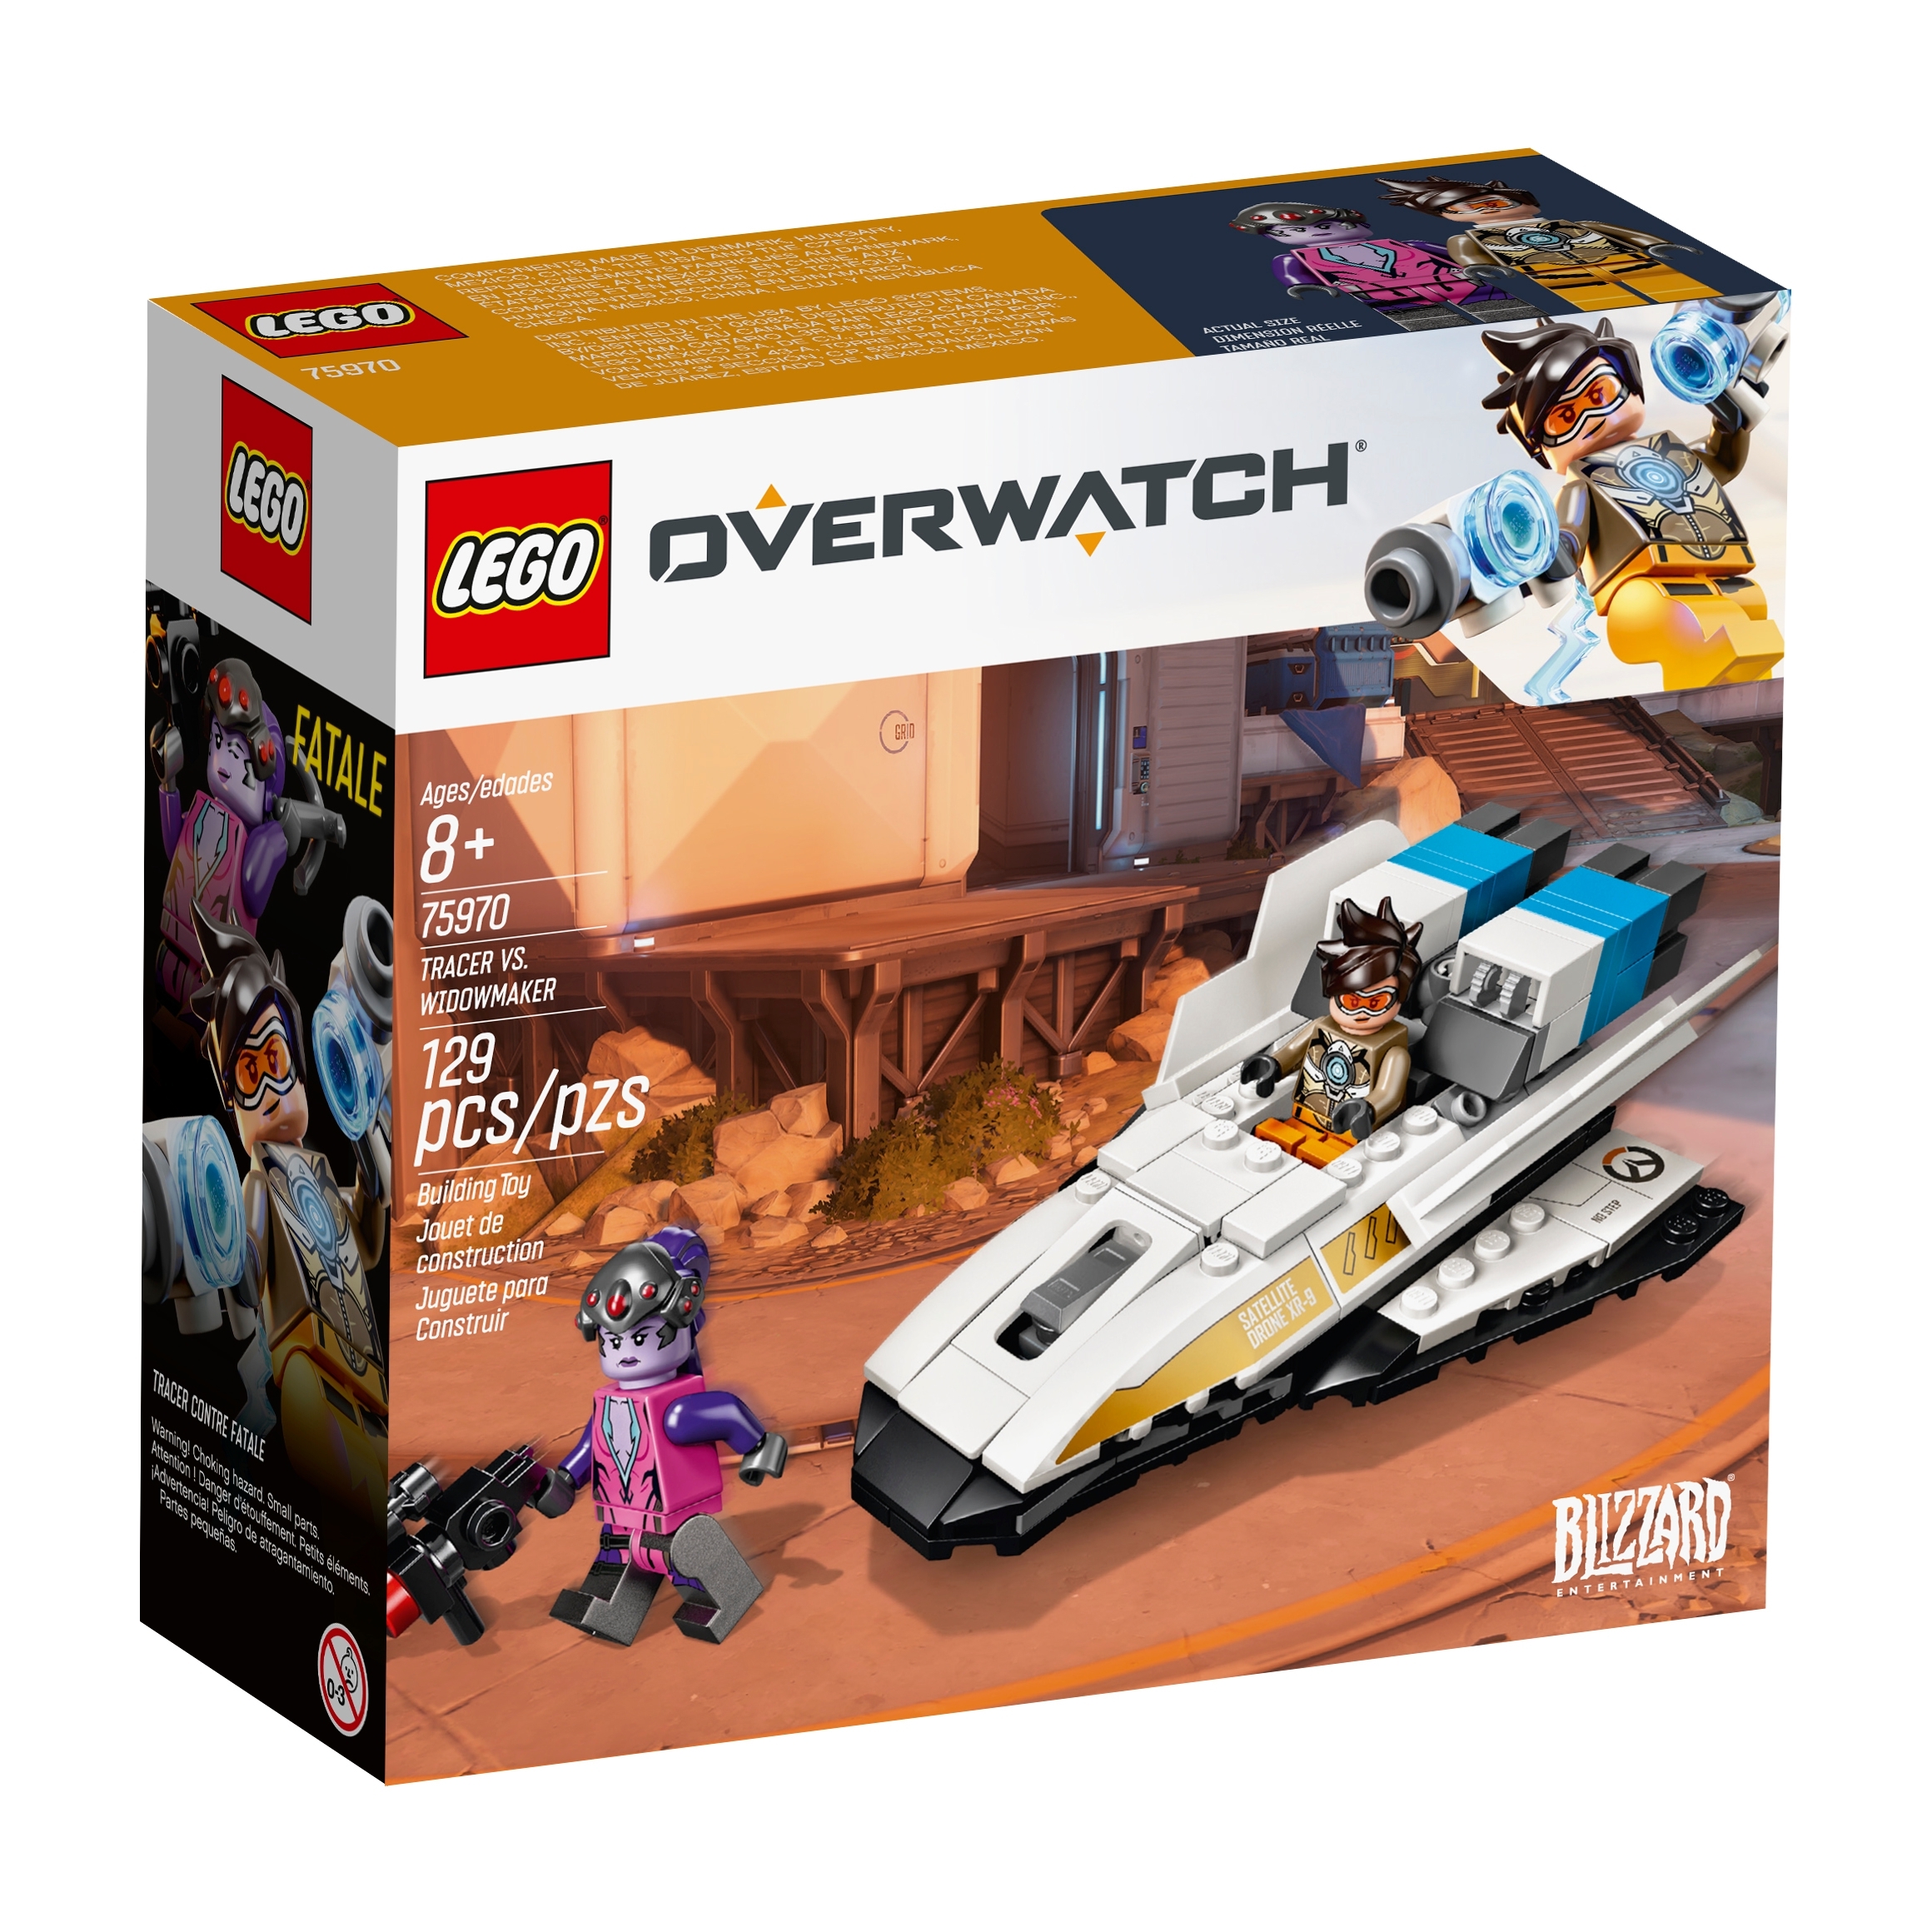 LEGO Overwatch Tracer Minifigure from 75970 Tracer vs Widowmaker ow001 NEW 